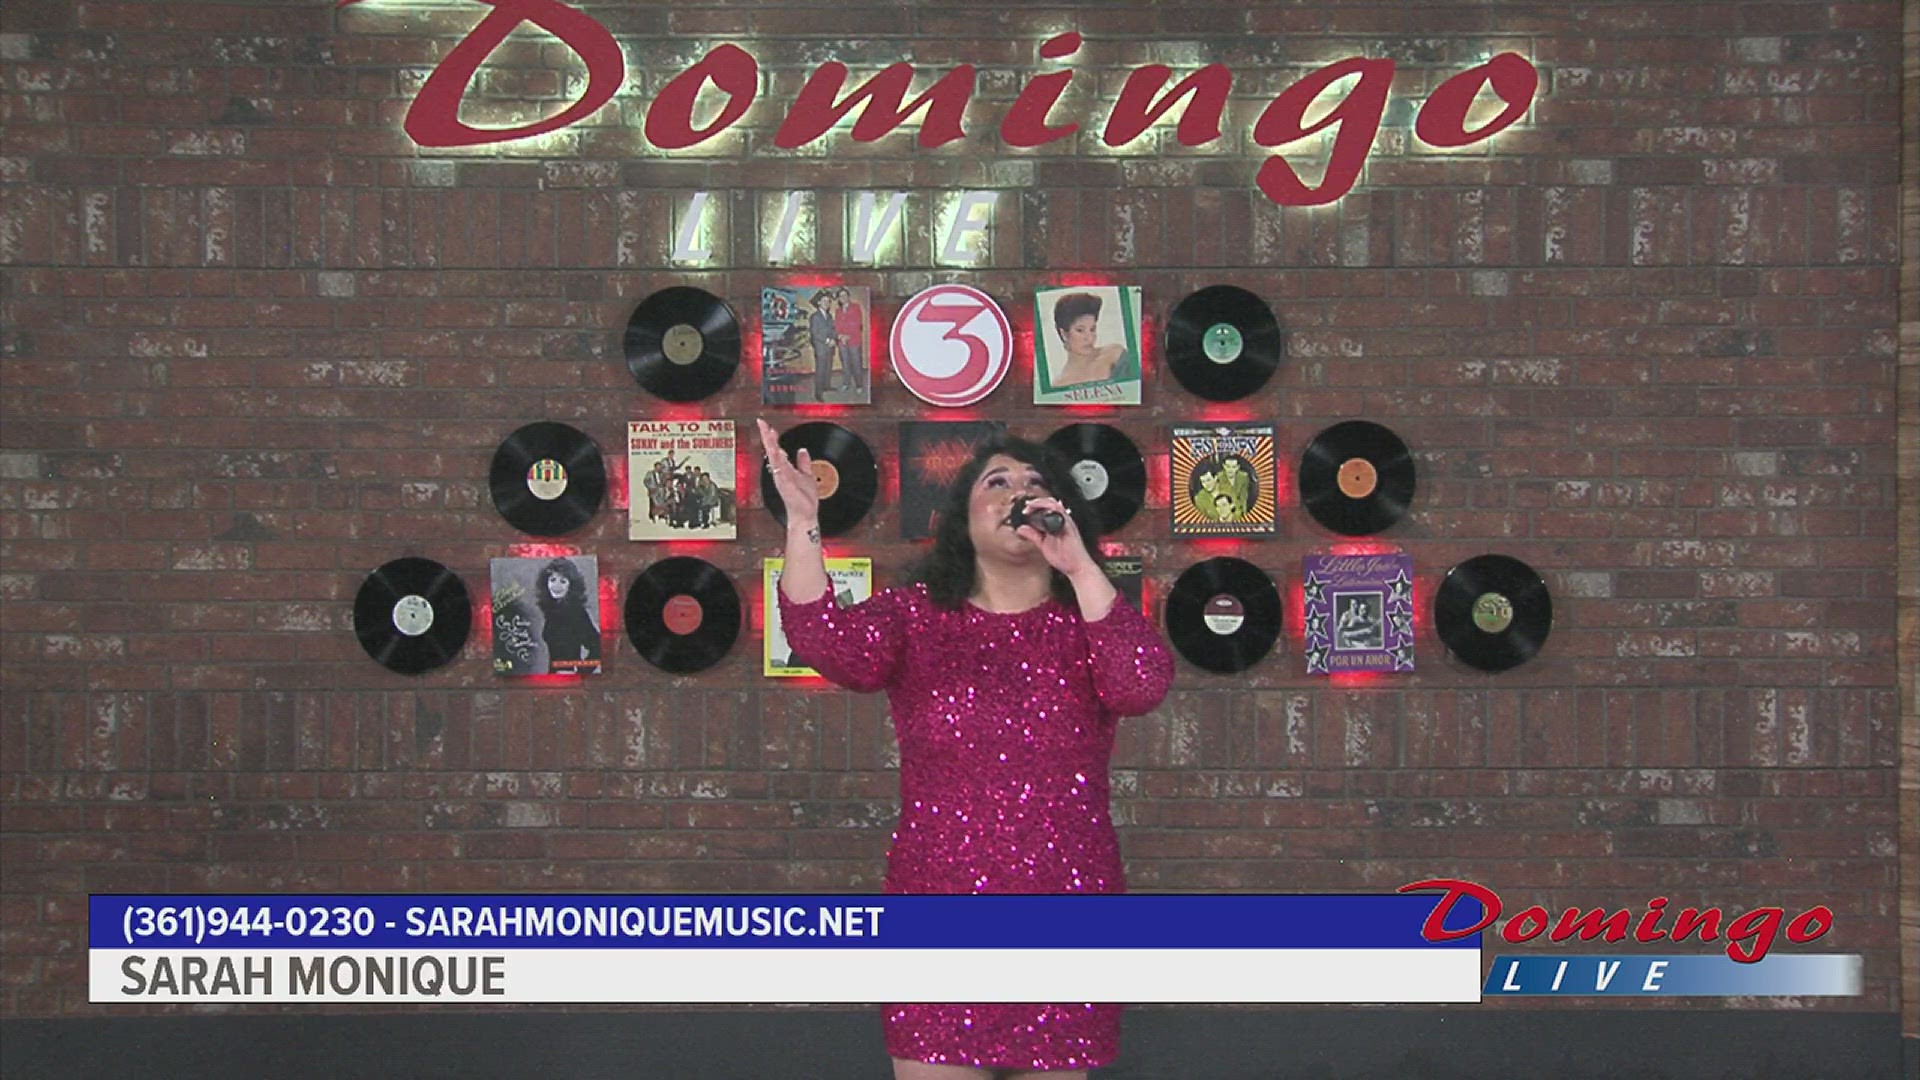 Tejano-Gospel singer Sarah Monique joined us live to perform her single "Supe Que Me Amabas" on Domingo Live.